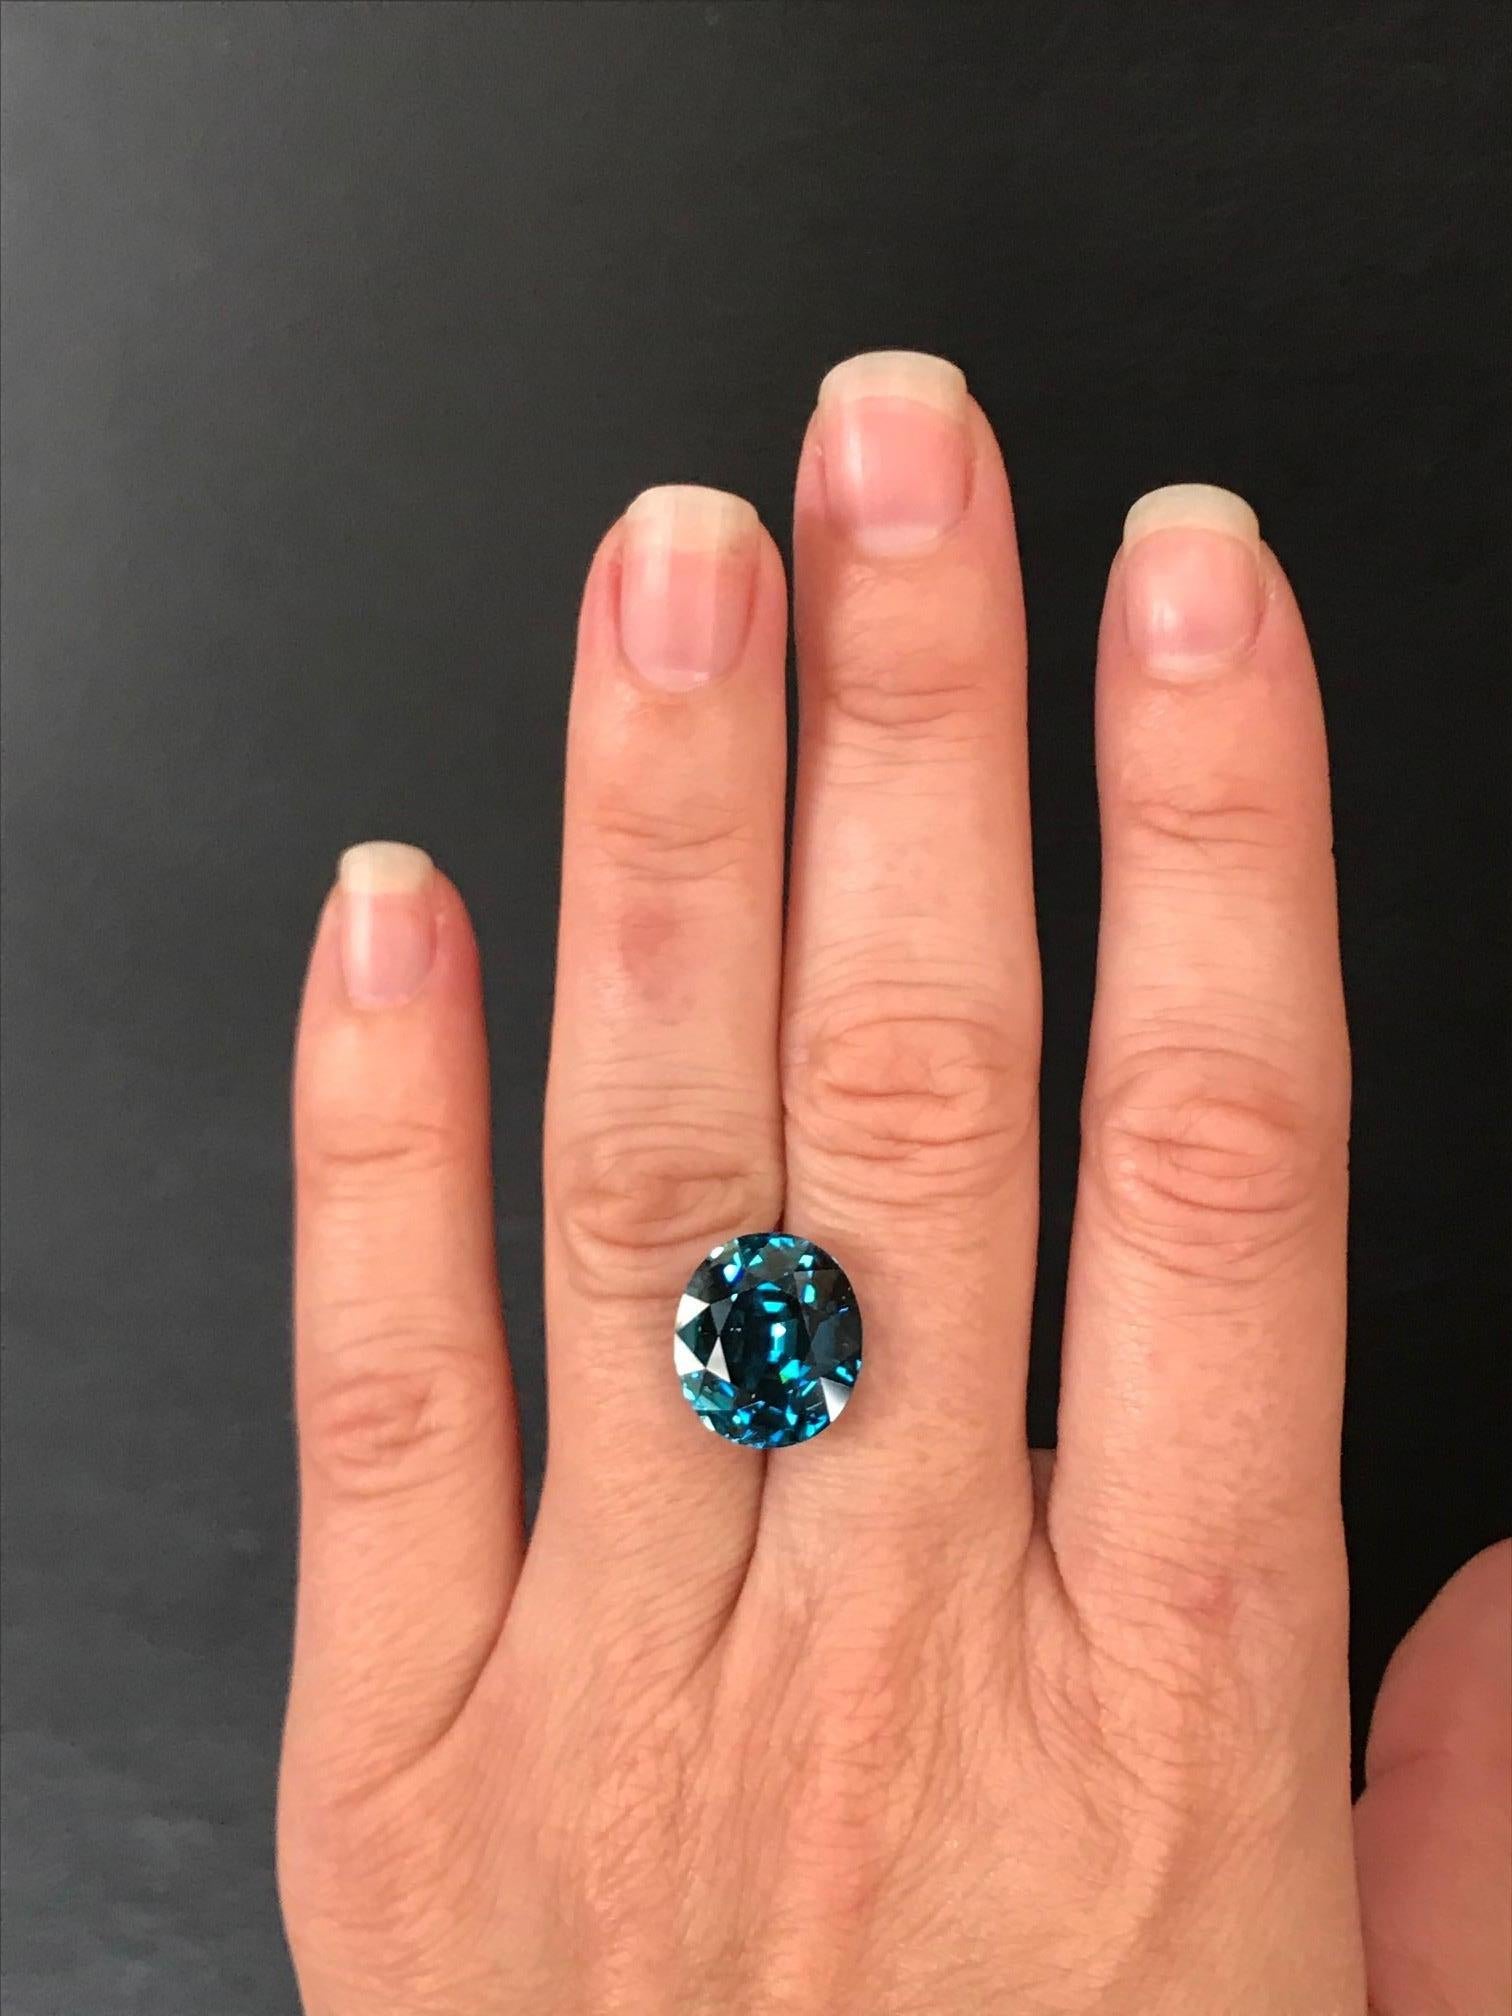 Exceptional 16.48 carat Blue Zircon oval gem offered loose to a lady or gentleman.
Returns are accepted and paid by us within 7 days of delivery.
We offer supreme custom jewelry work upon request. Please contact us for more details.
For your